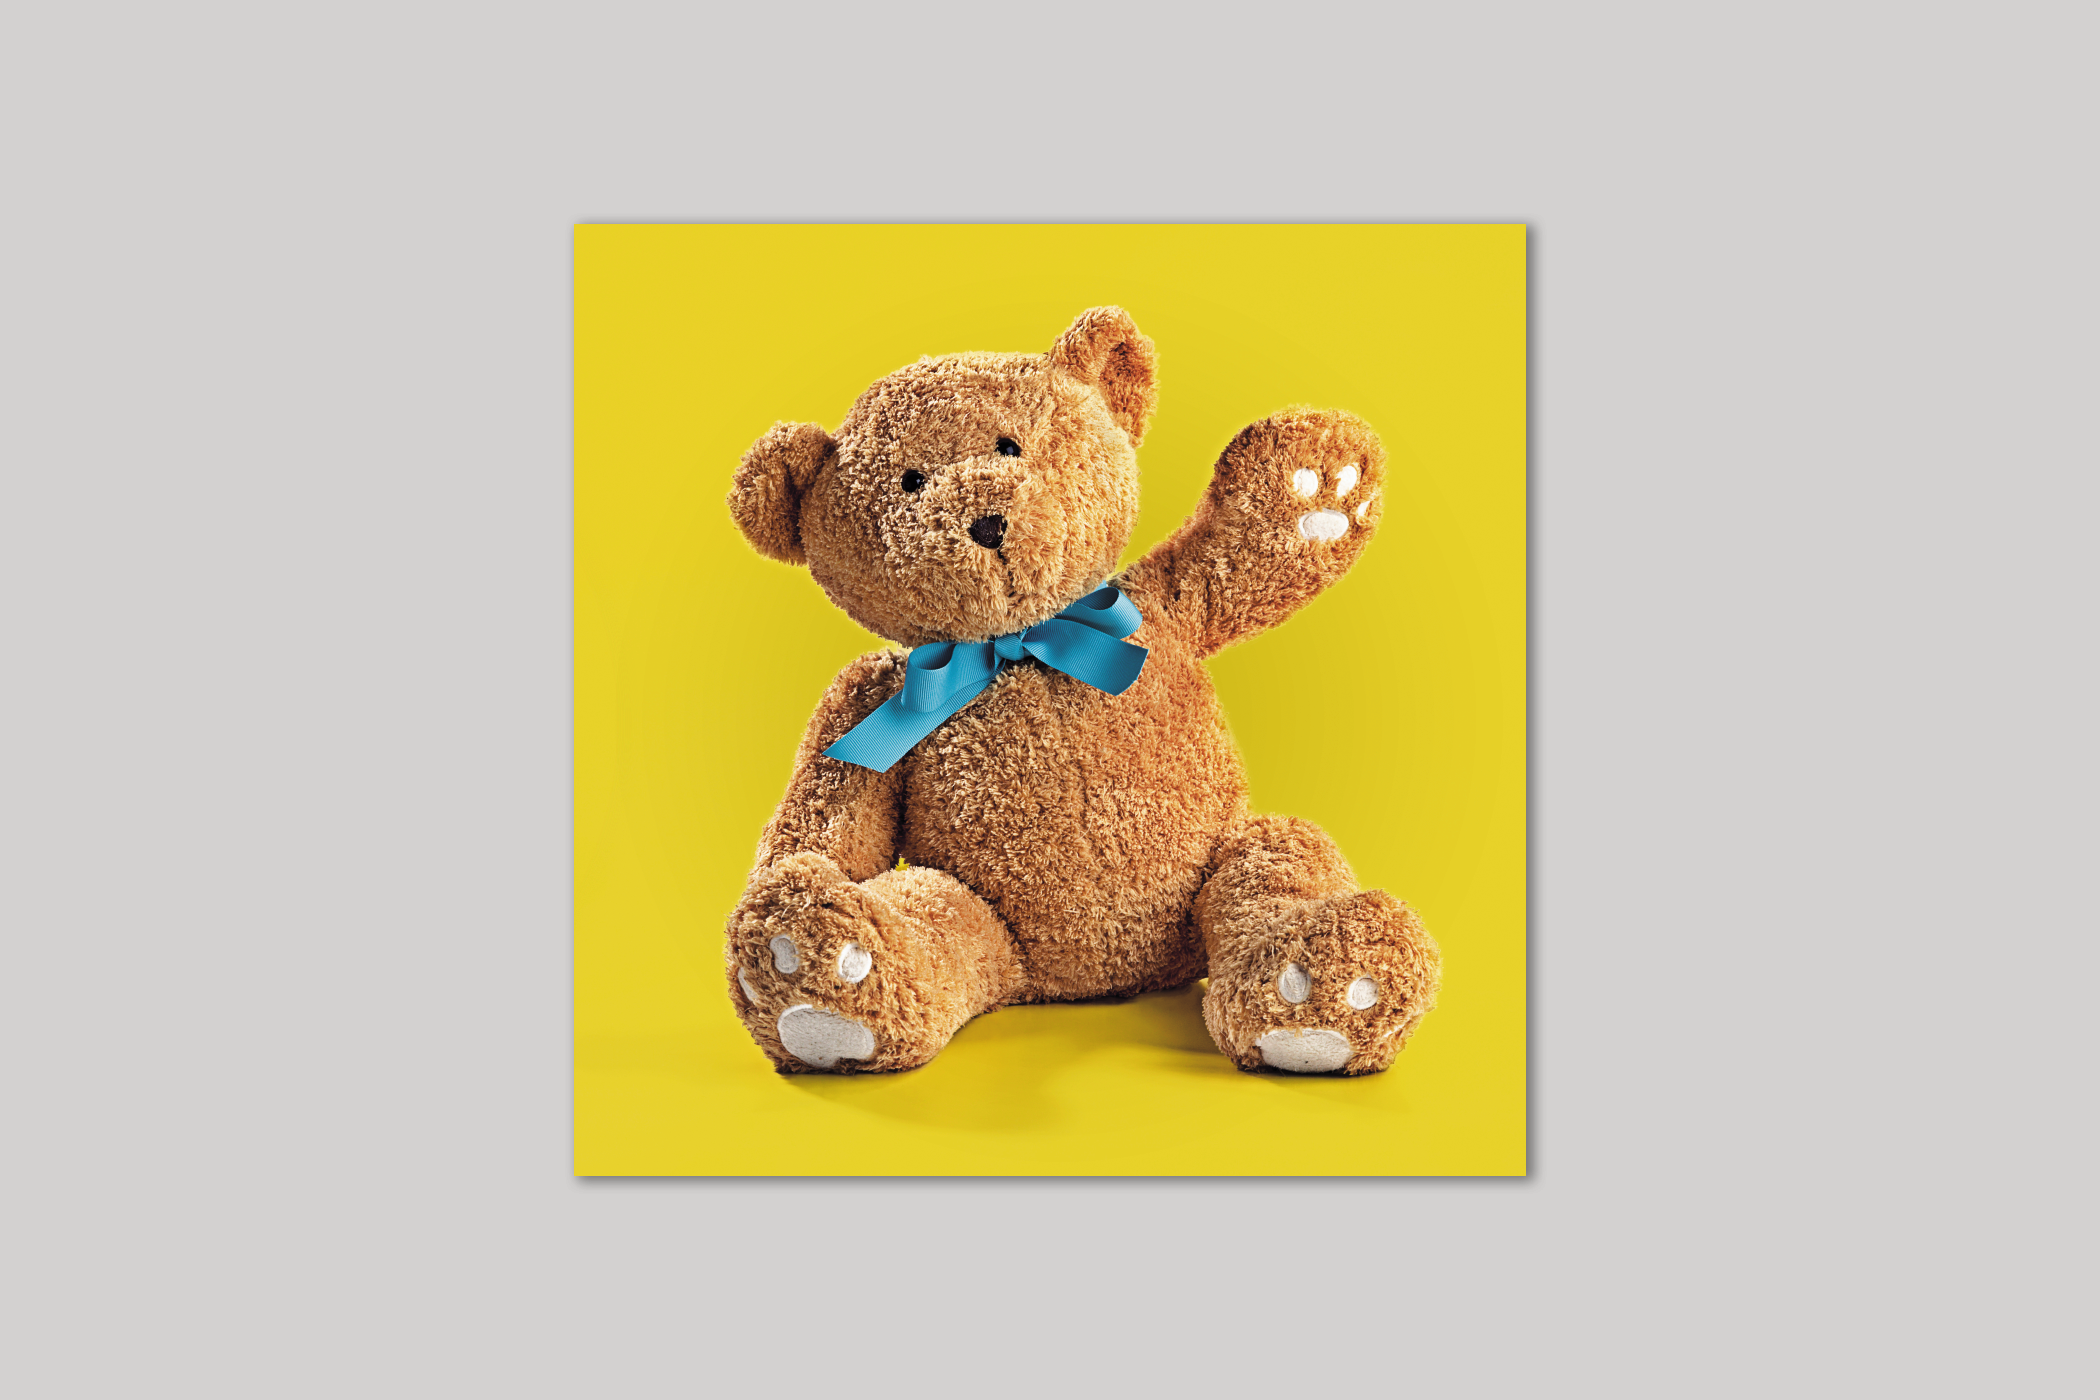 Big Ted from Exposure range of photographic cards by Icon.